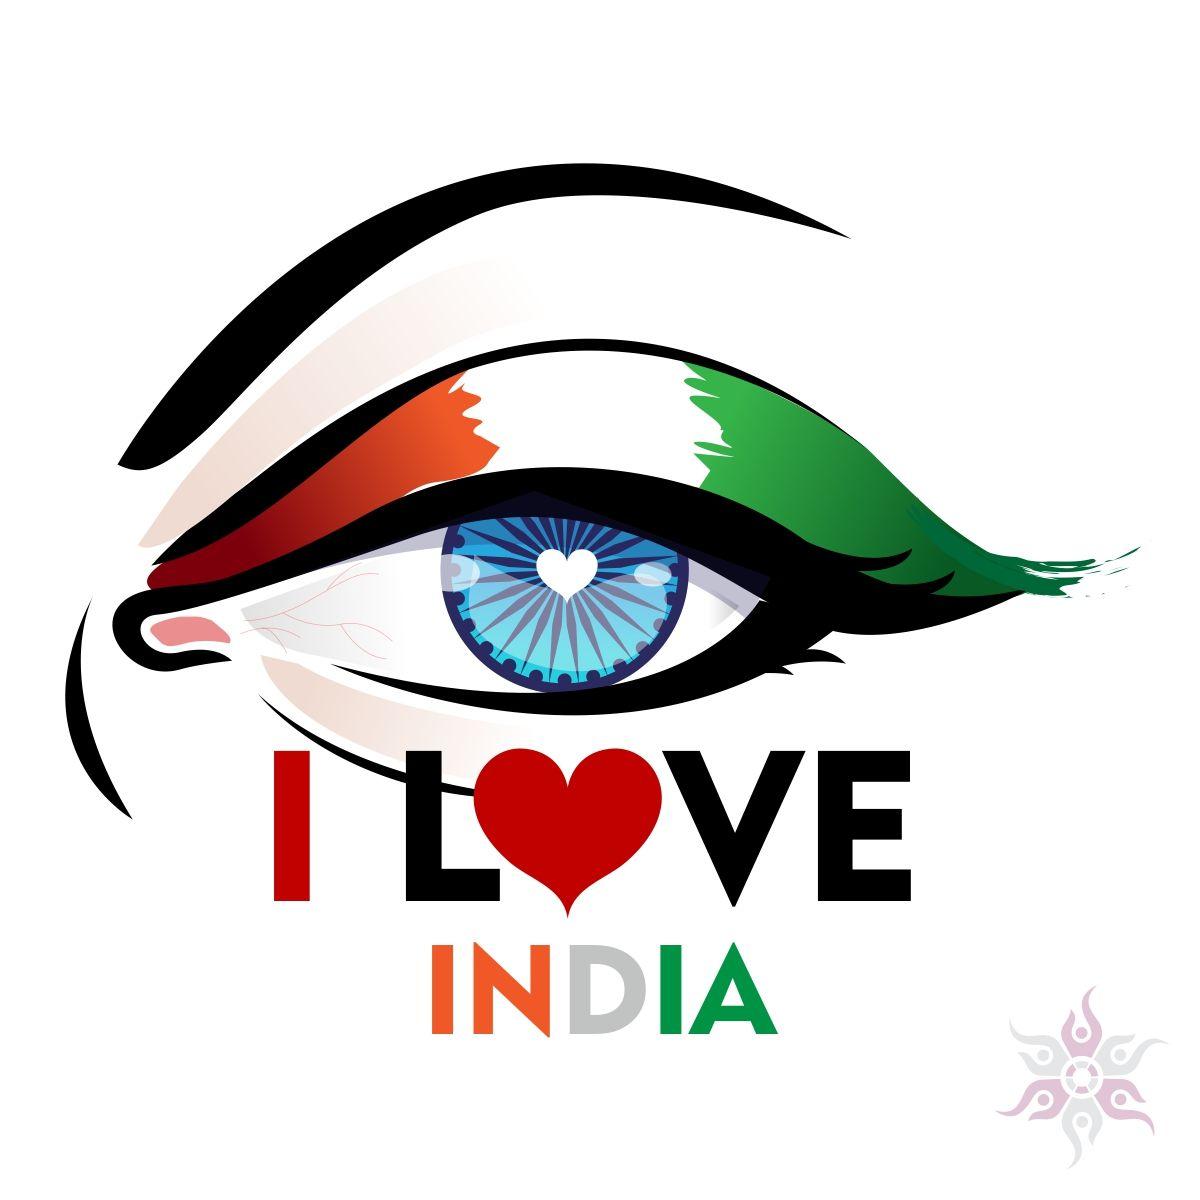 I am Proud to be Indian, do you?. Indian flag image